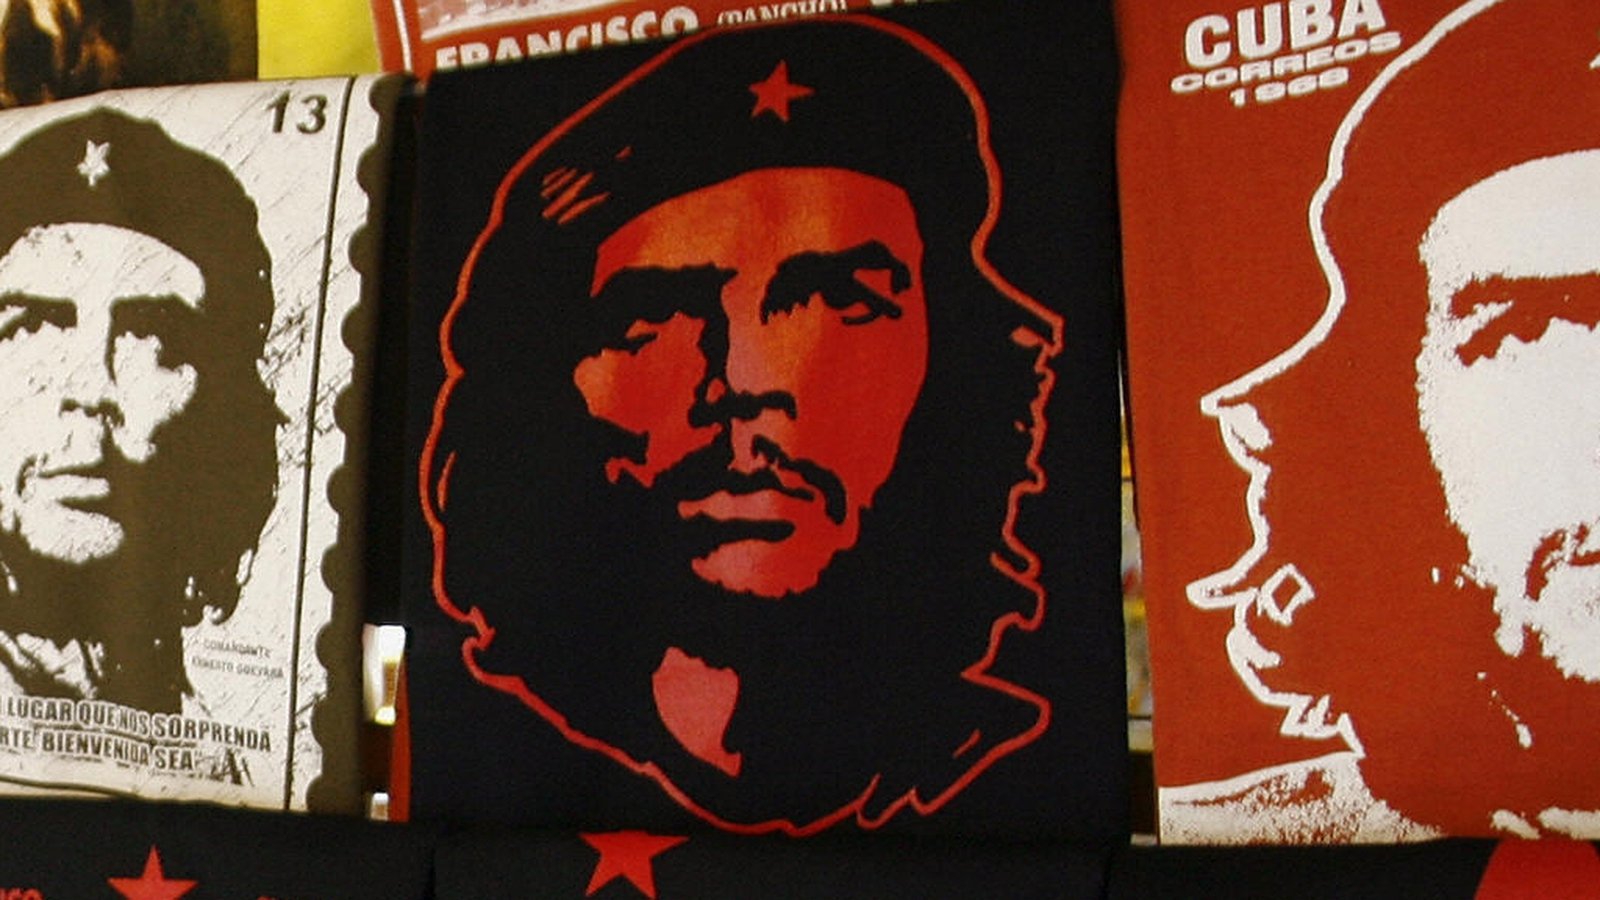 How Che Guevara's iconic image became a design classic